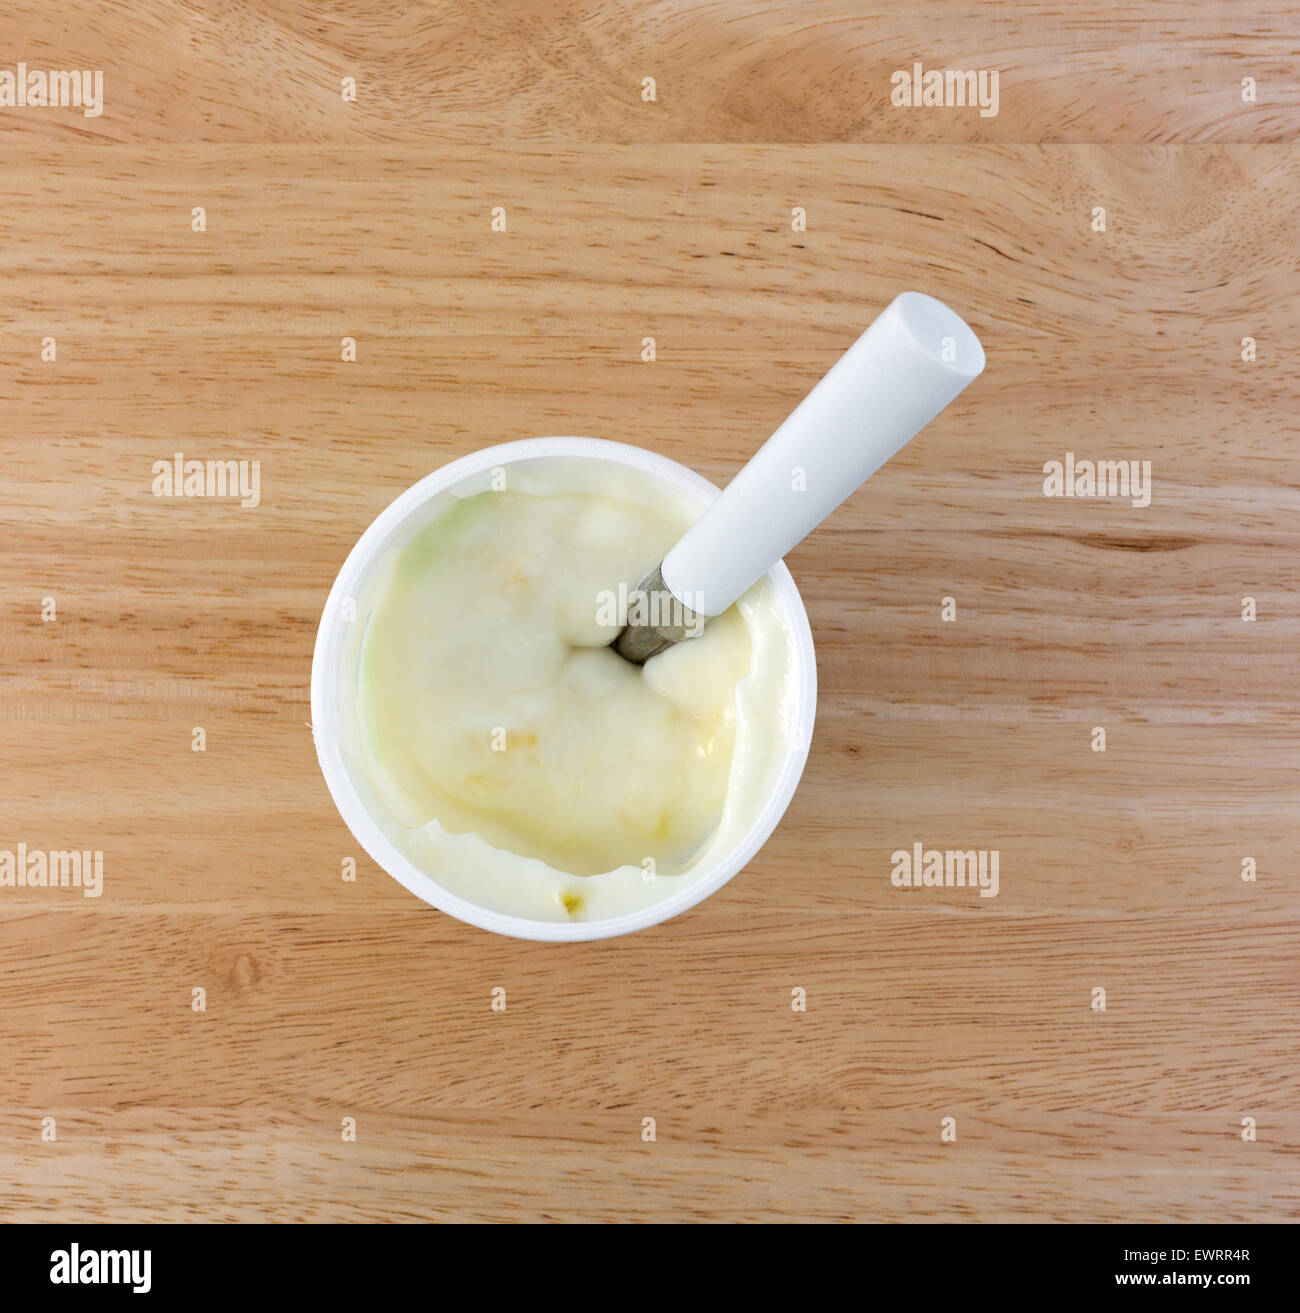 Top view of a small container of pineapple yogurt with a white handle spoon on a wood table top. Stock Photo